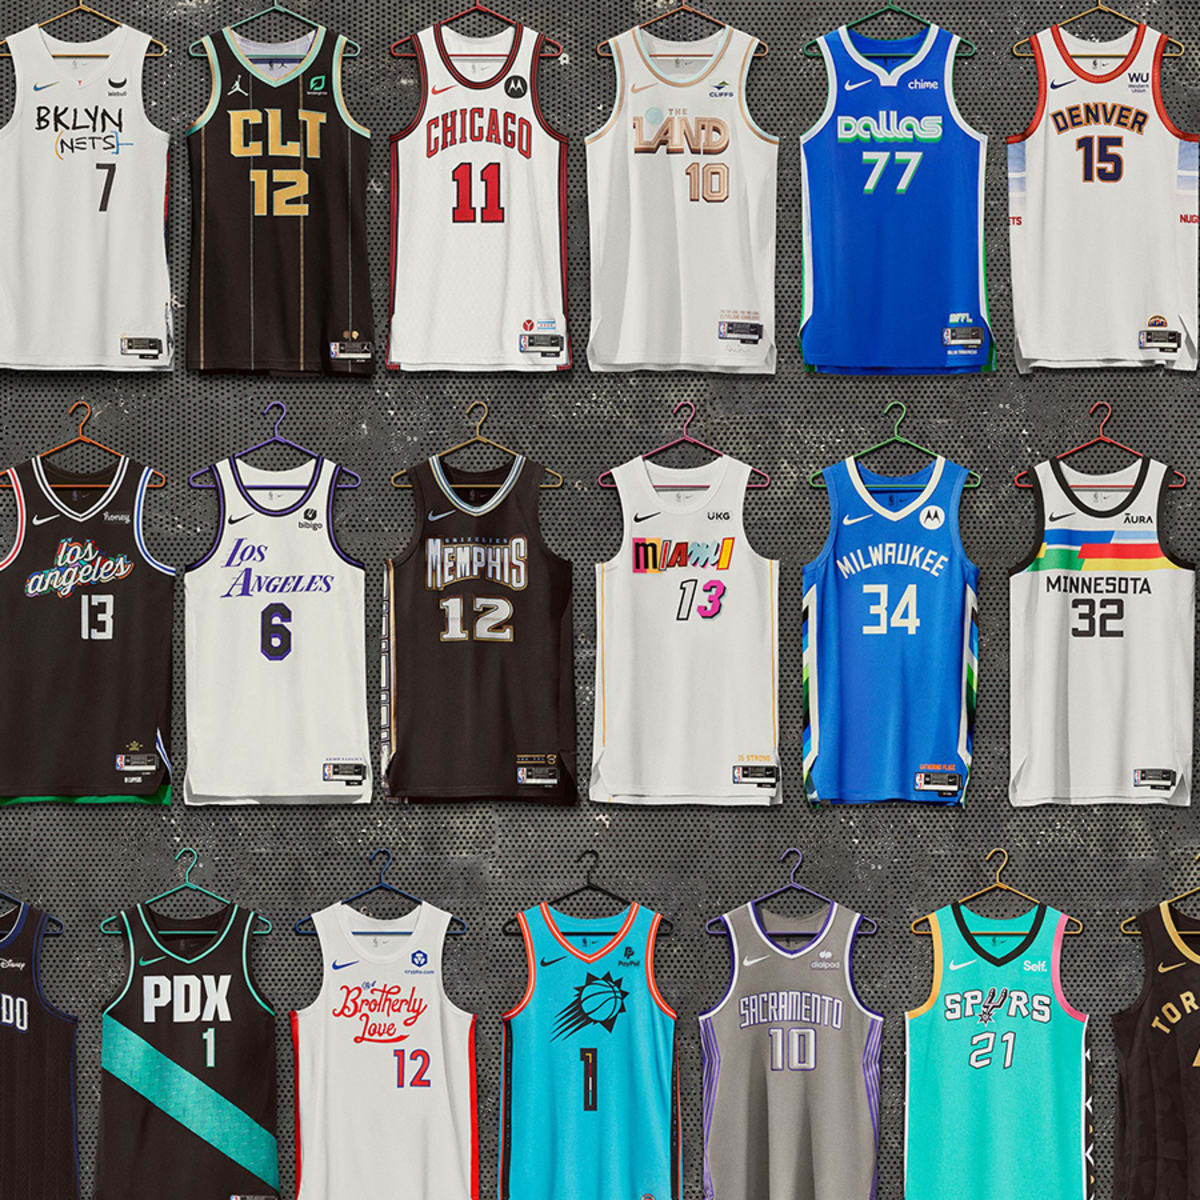 Ranking Nike's 'City Edition' NBA Jersey Release - Sports Illustrated